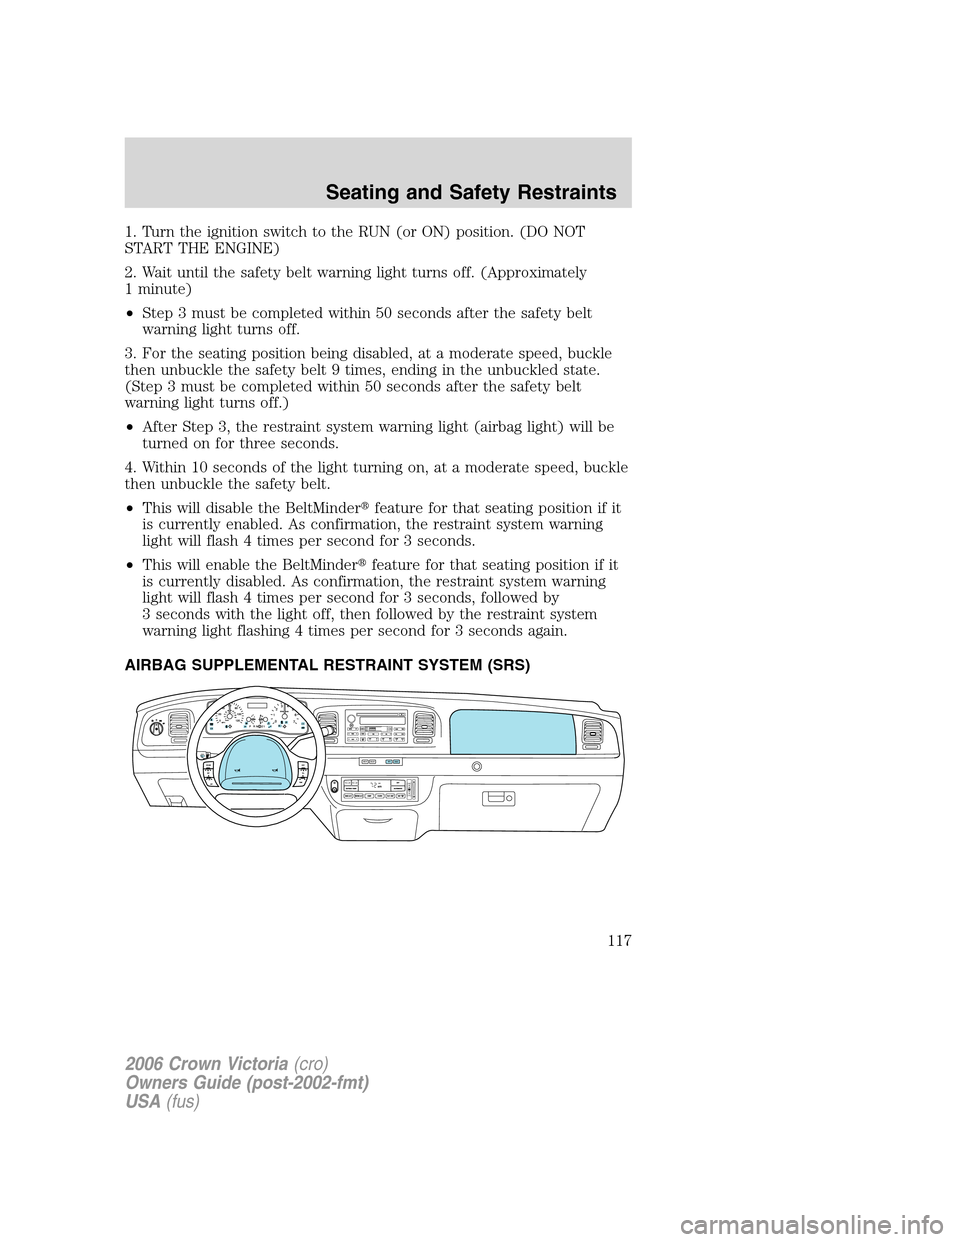 FORD CROWN VICTORIA 2006 2.G Owners Manual 1. Turn the ignition switch to the RUN (or ON) position. (DO NOT
START THE ENGINE)
2. Wait until the safety belt warning light turns off. (Approximately
1 minute)
•Step 3 must be completed within 50